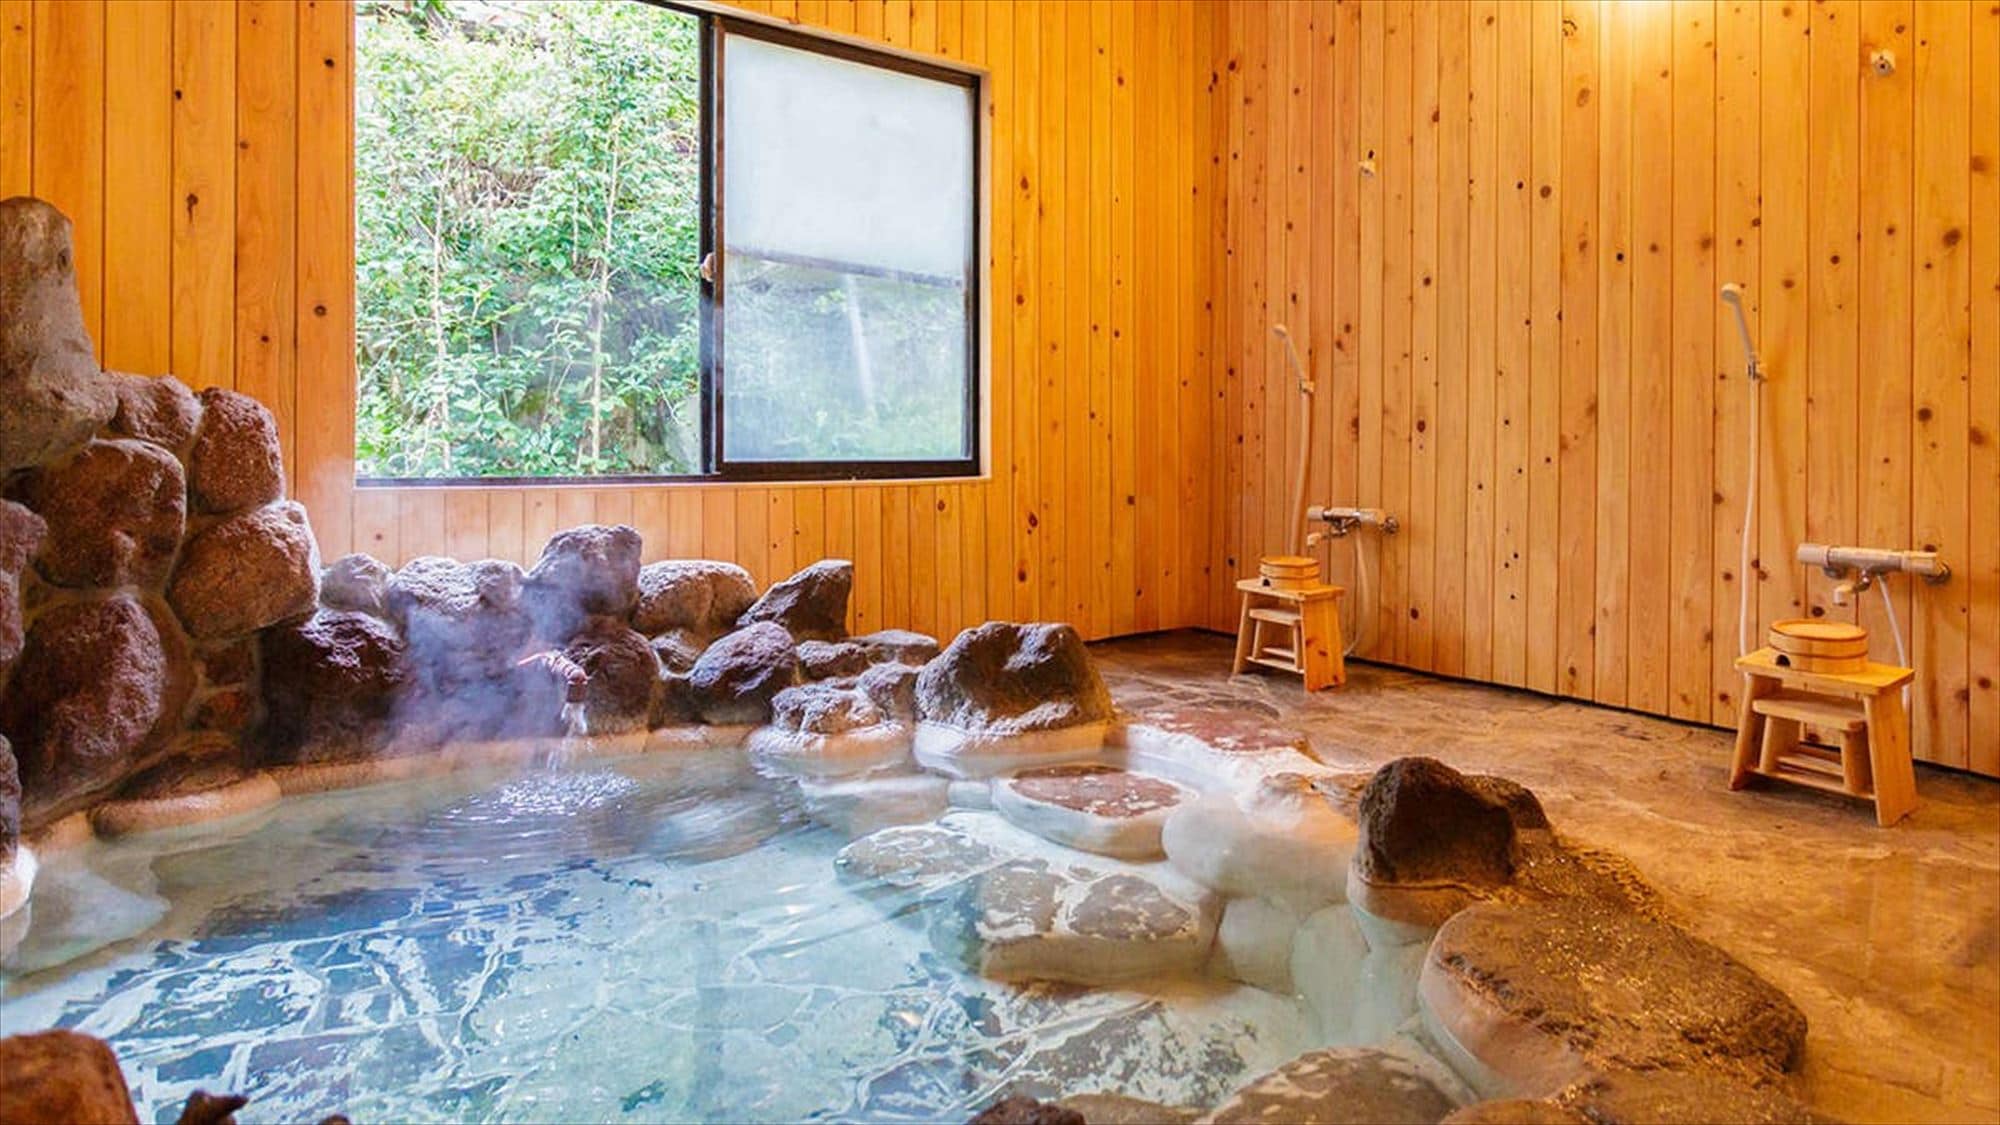 [Chartered bath] There are two private baths in the rock bath. Free for hotel guests.